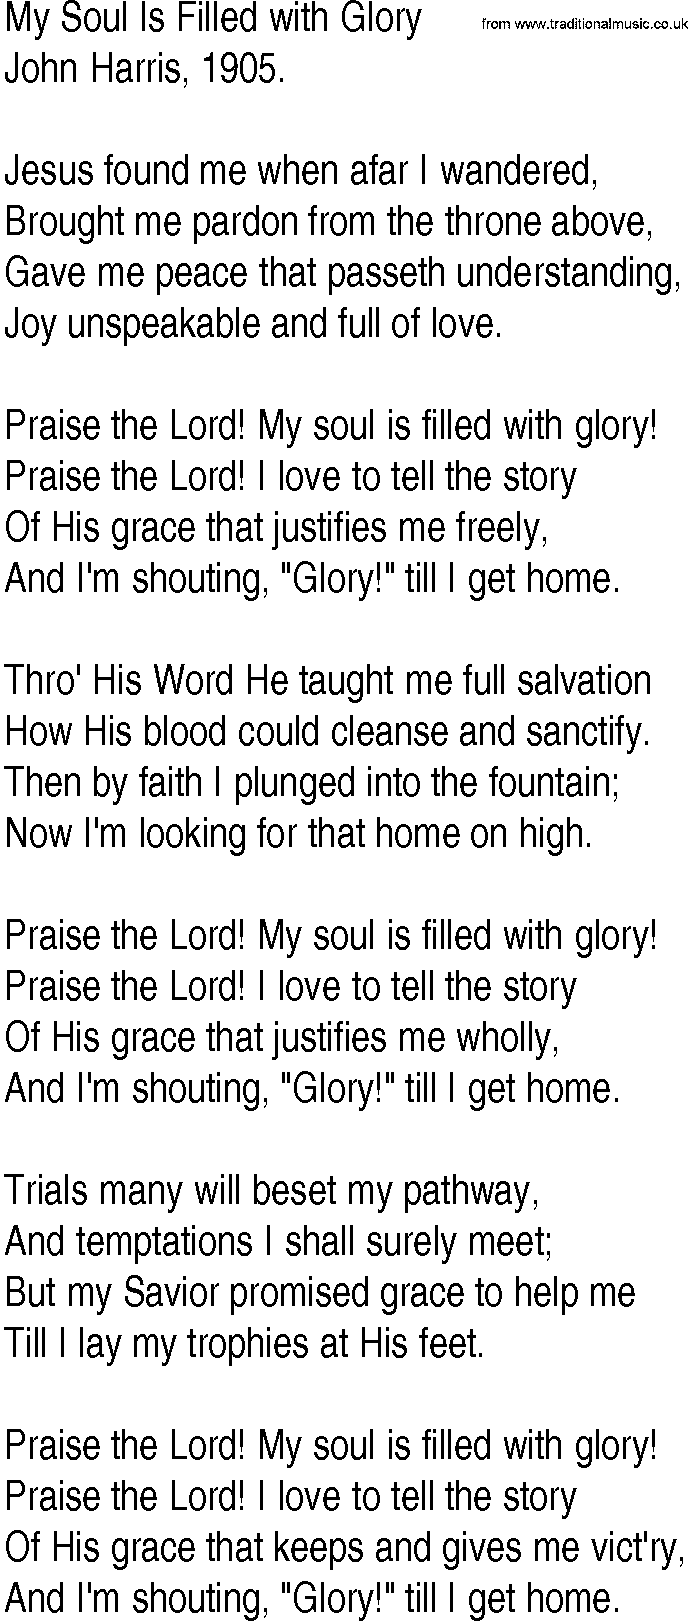 Hymn and Gospel Song: My Soul Is Filled with Glory by John Harris lyrics